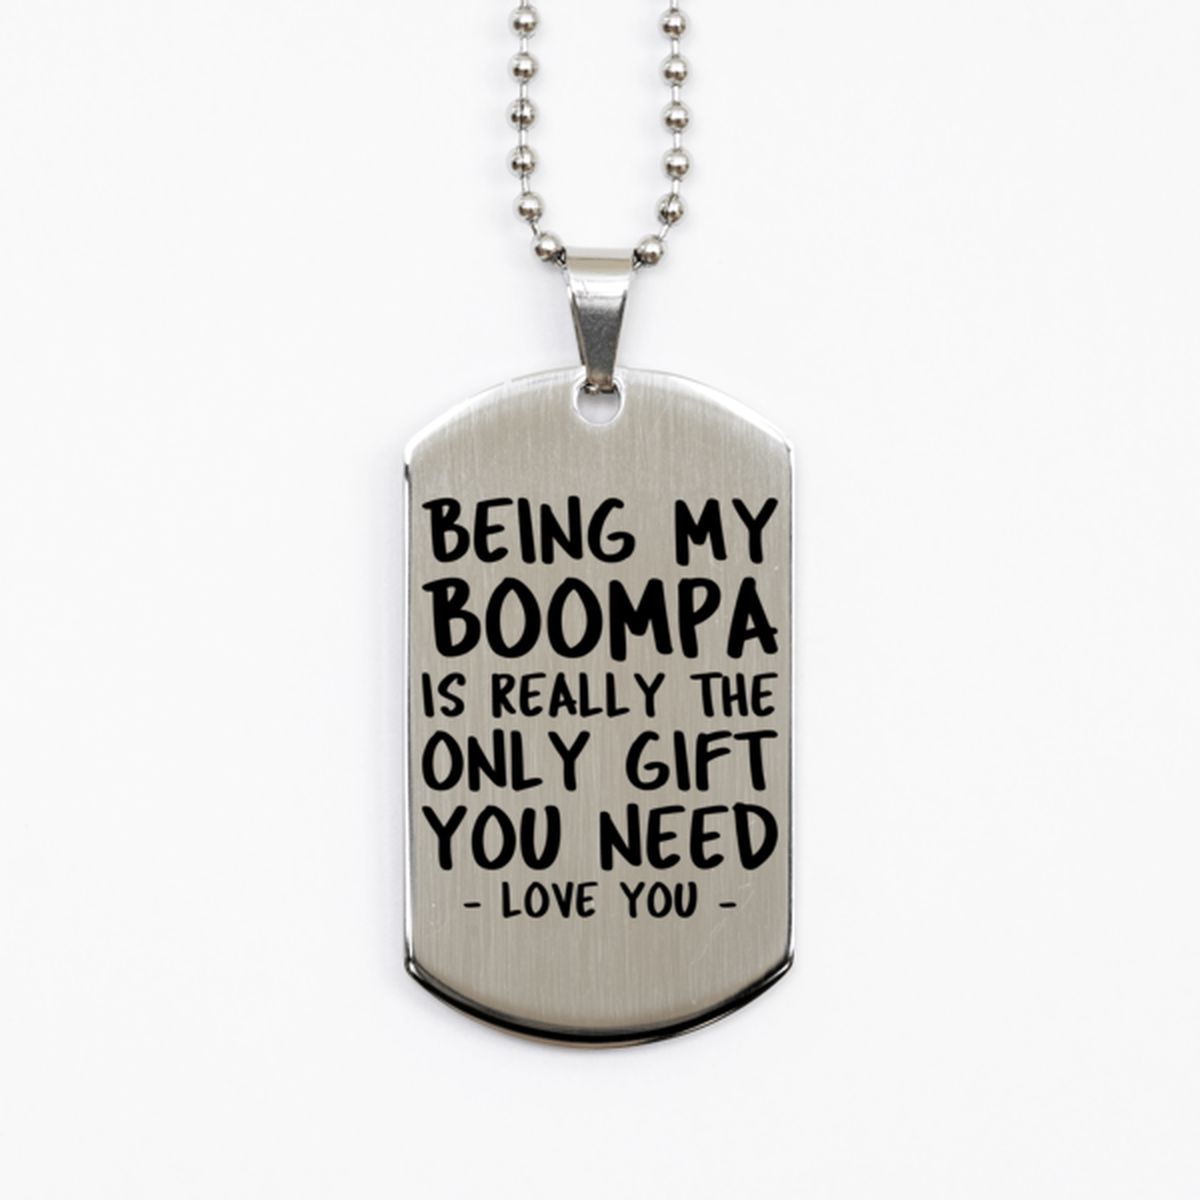 Funny Boompa Silver Dog Tag Necklace, Being My Boompa Is Really the Only Gift You Need, Best Birthday Gifts for Boompa